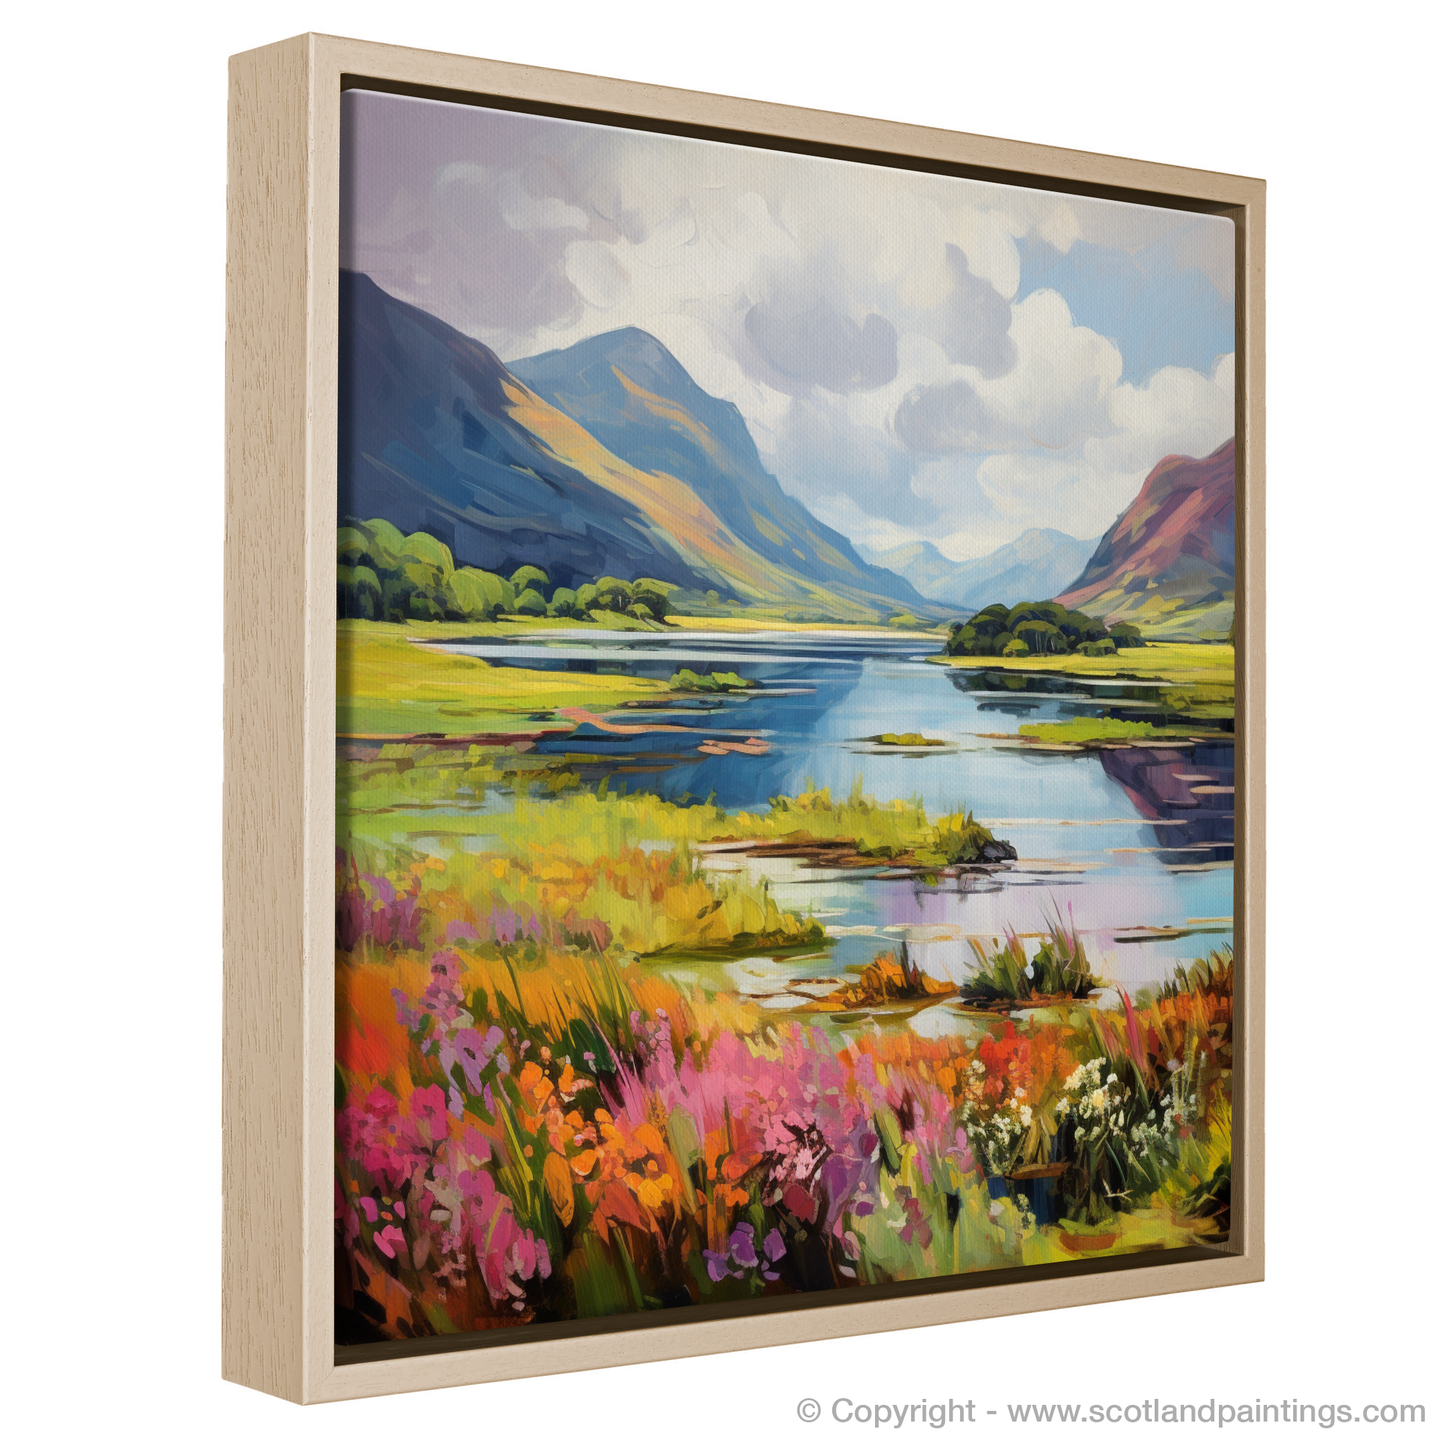 Painting and Art Print of Loch Leven, Highlands in summer entitled "Highland Summer Serenade: A Fauvist Ode to Loch Leven".